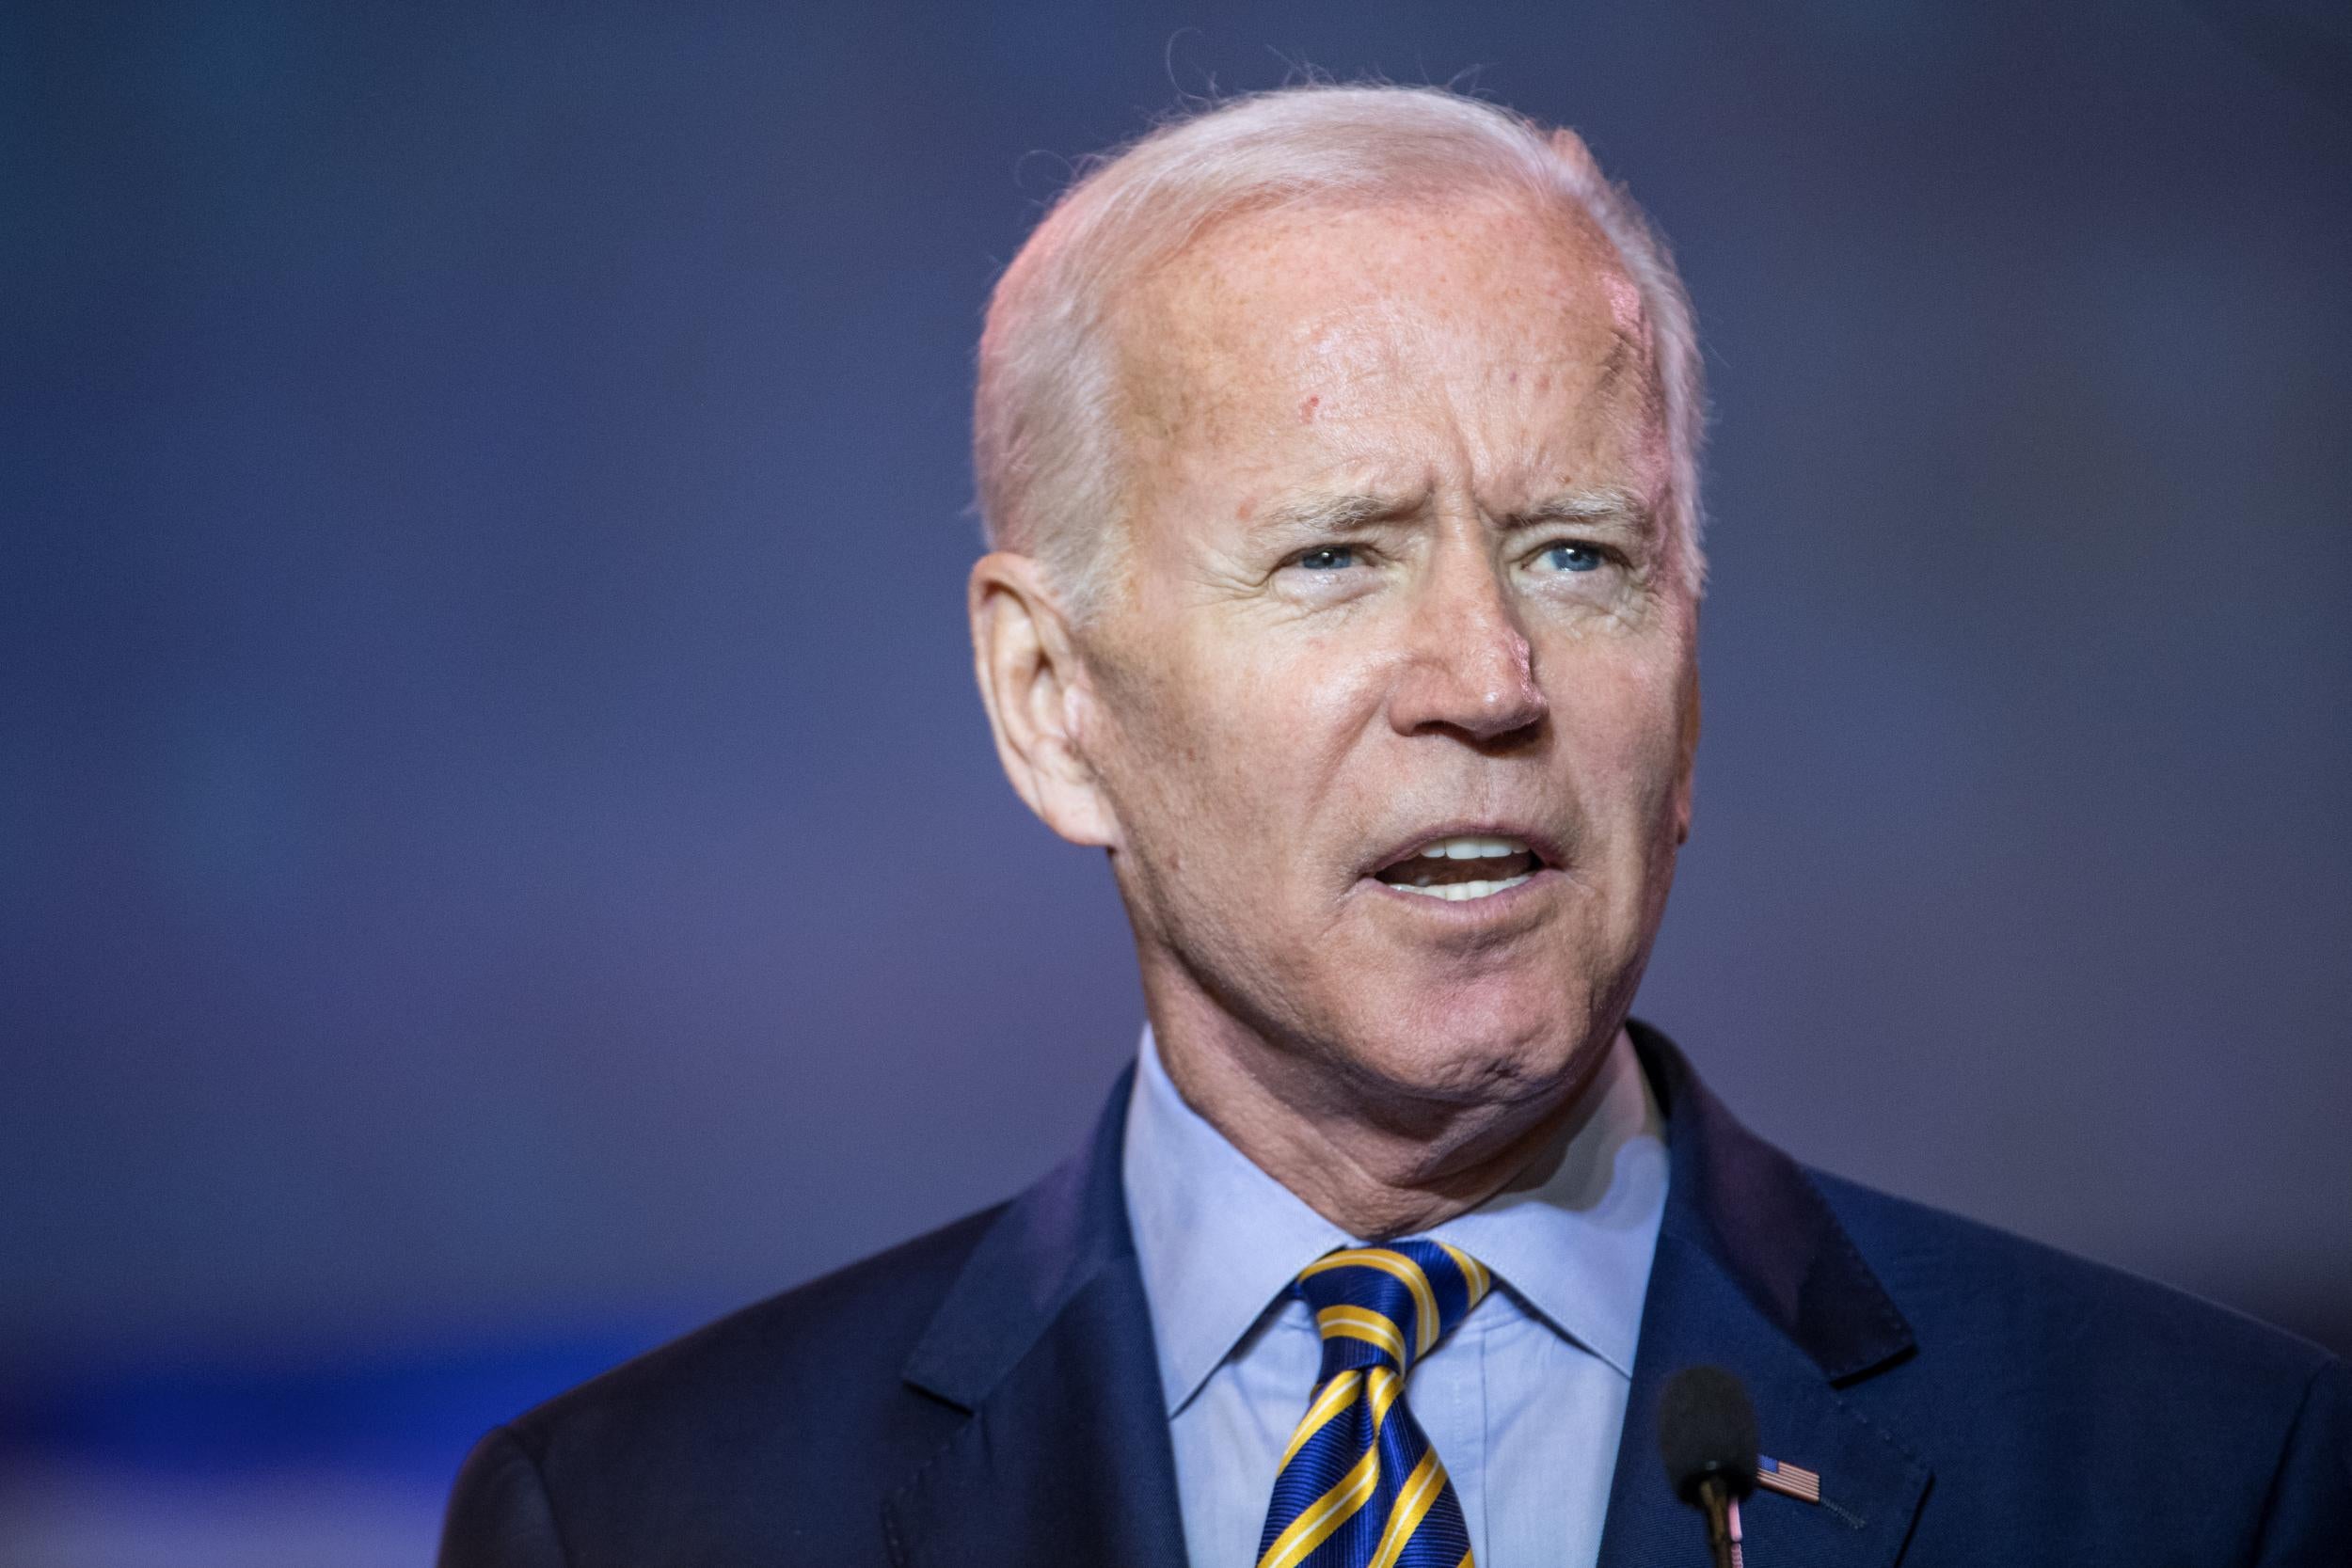 Joe Biden has hit out at Donald Trump over his hard-line view on immigration while unveiling several proposals in a new Op-Ed.